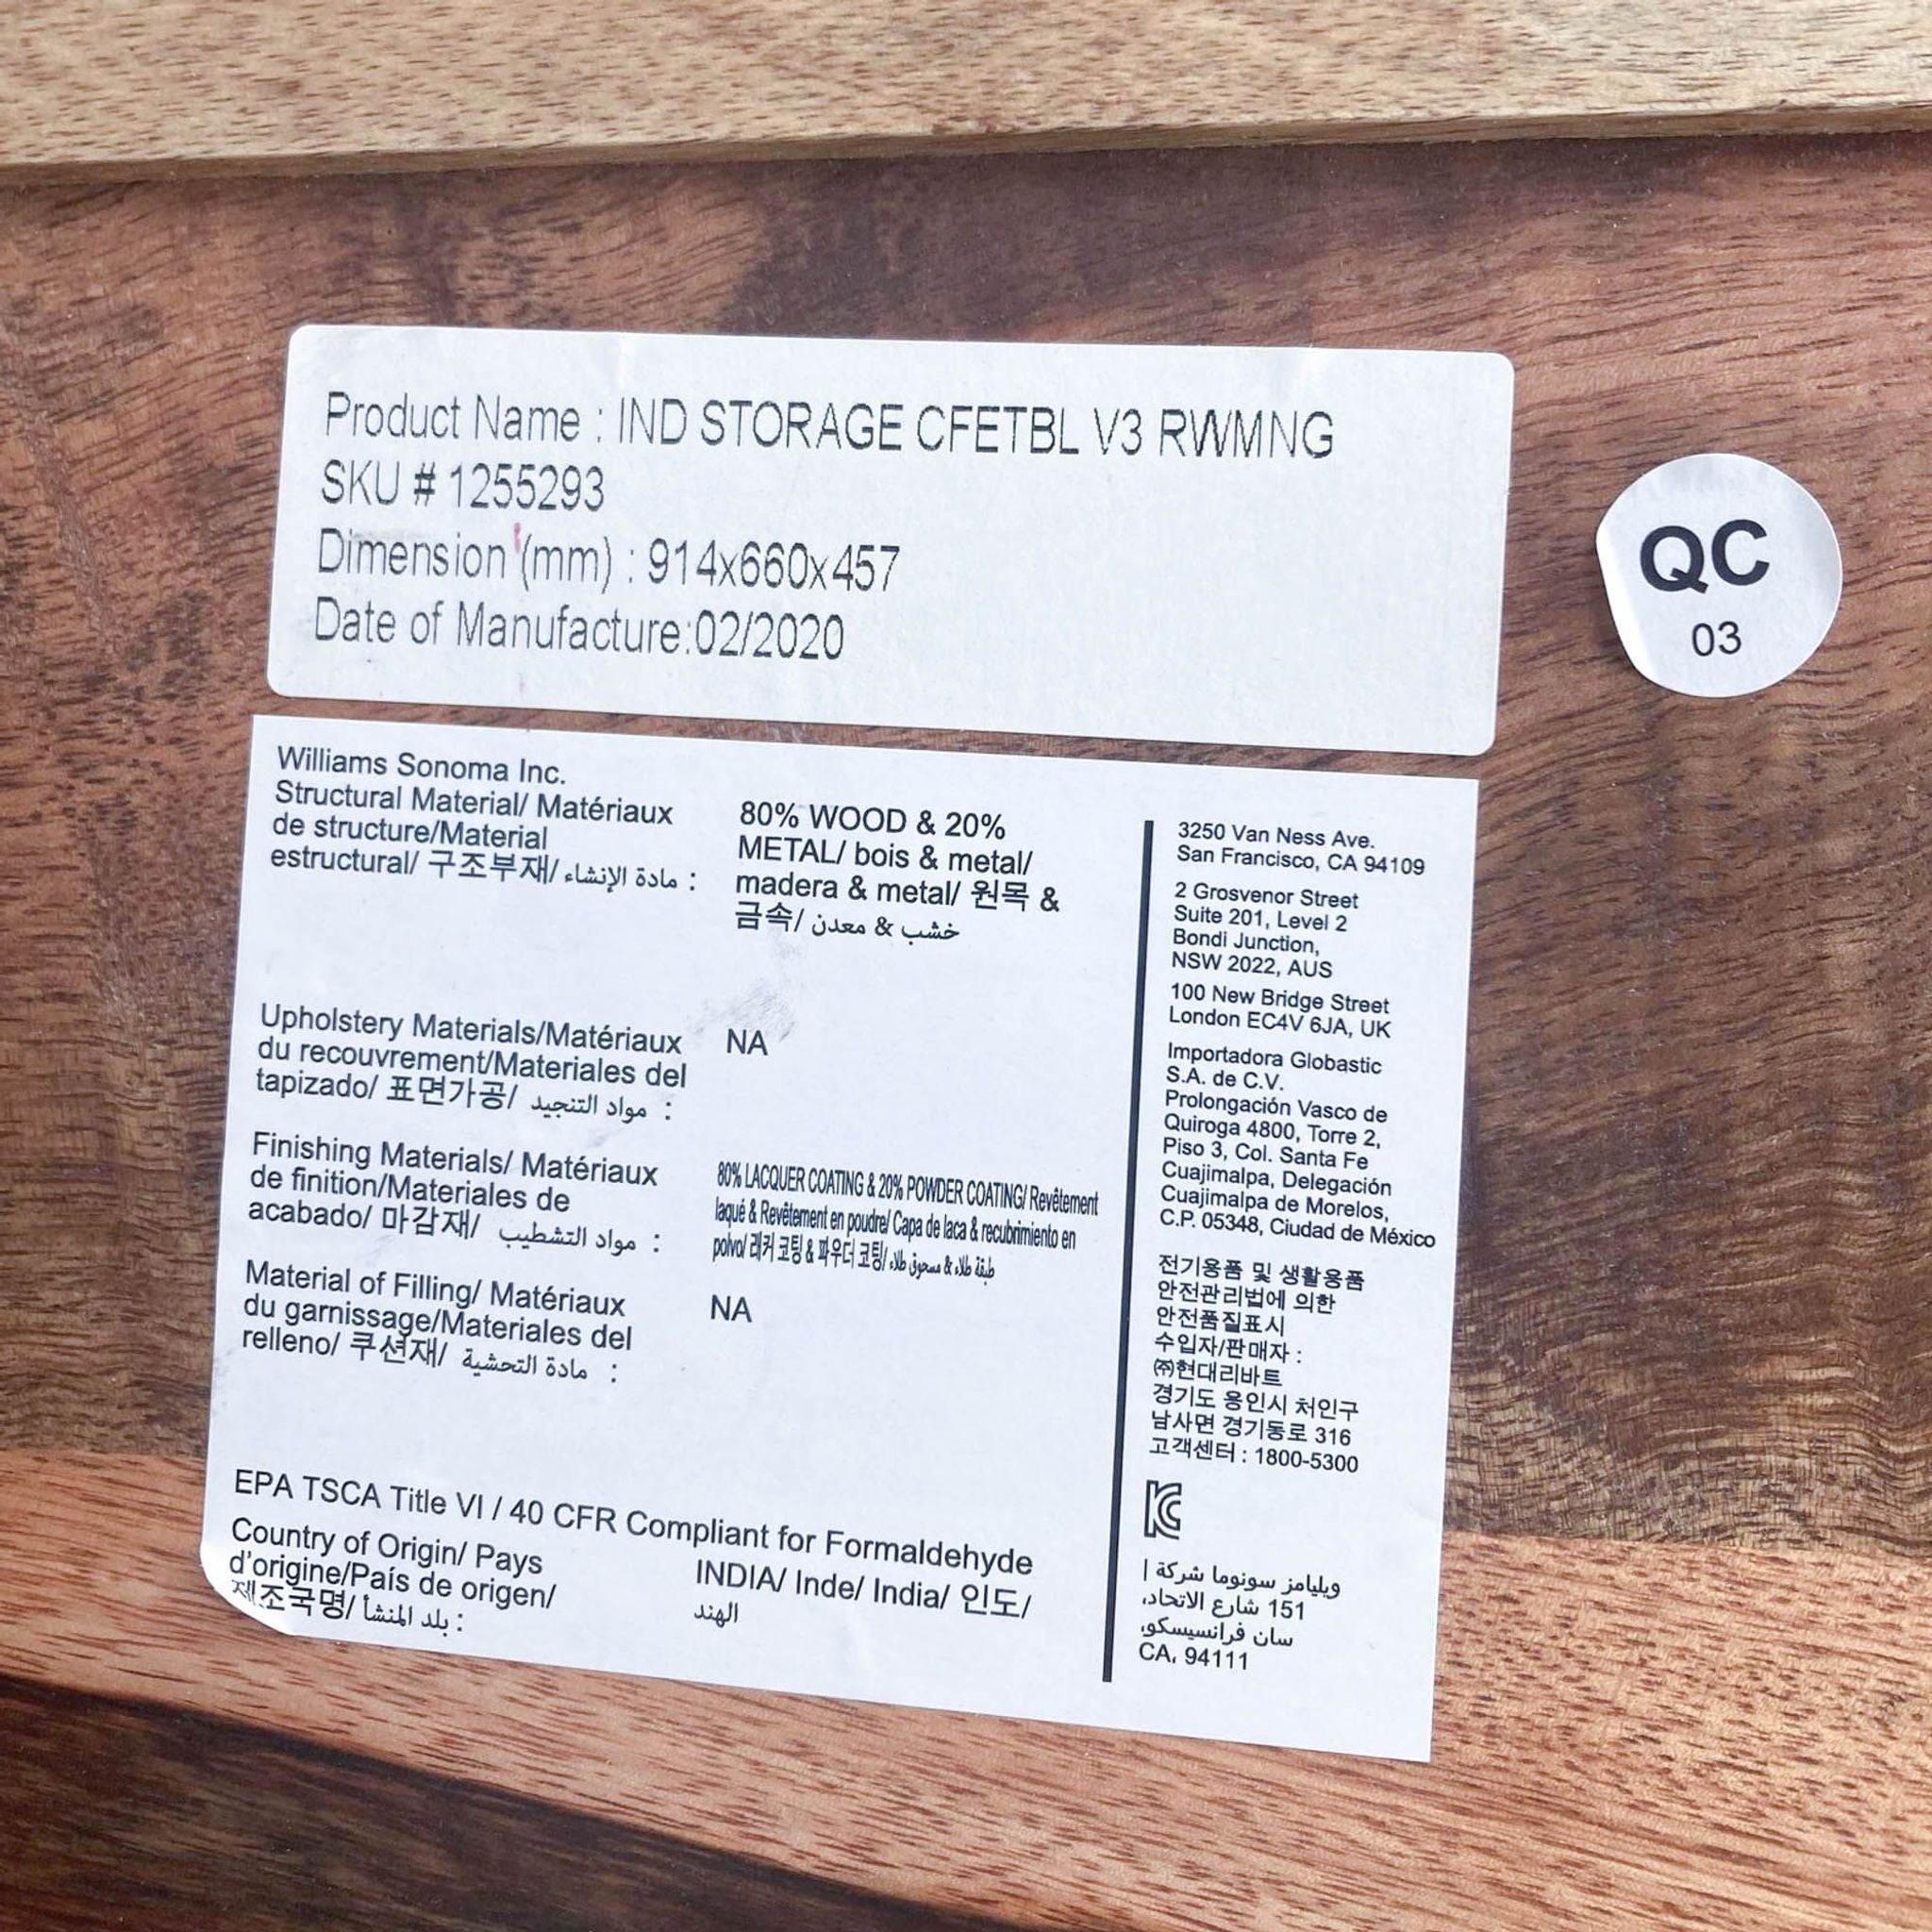 Close-up of manufacturer's label on West Elm mango wood coffee table detailing product name, materials, and origin.